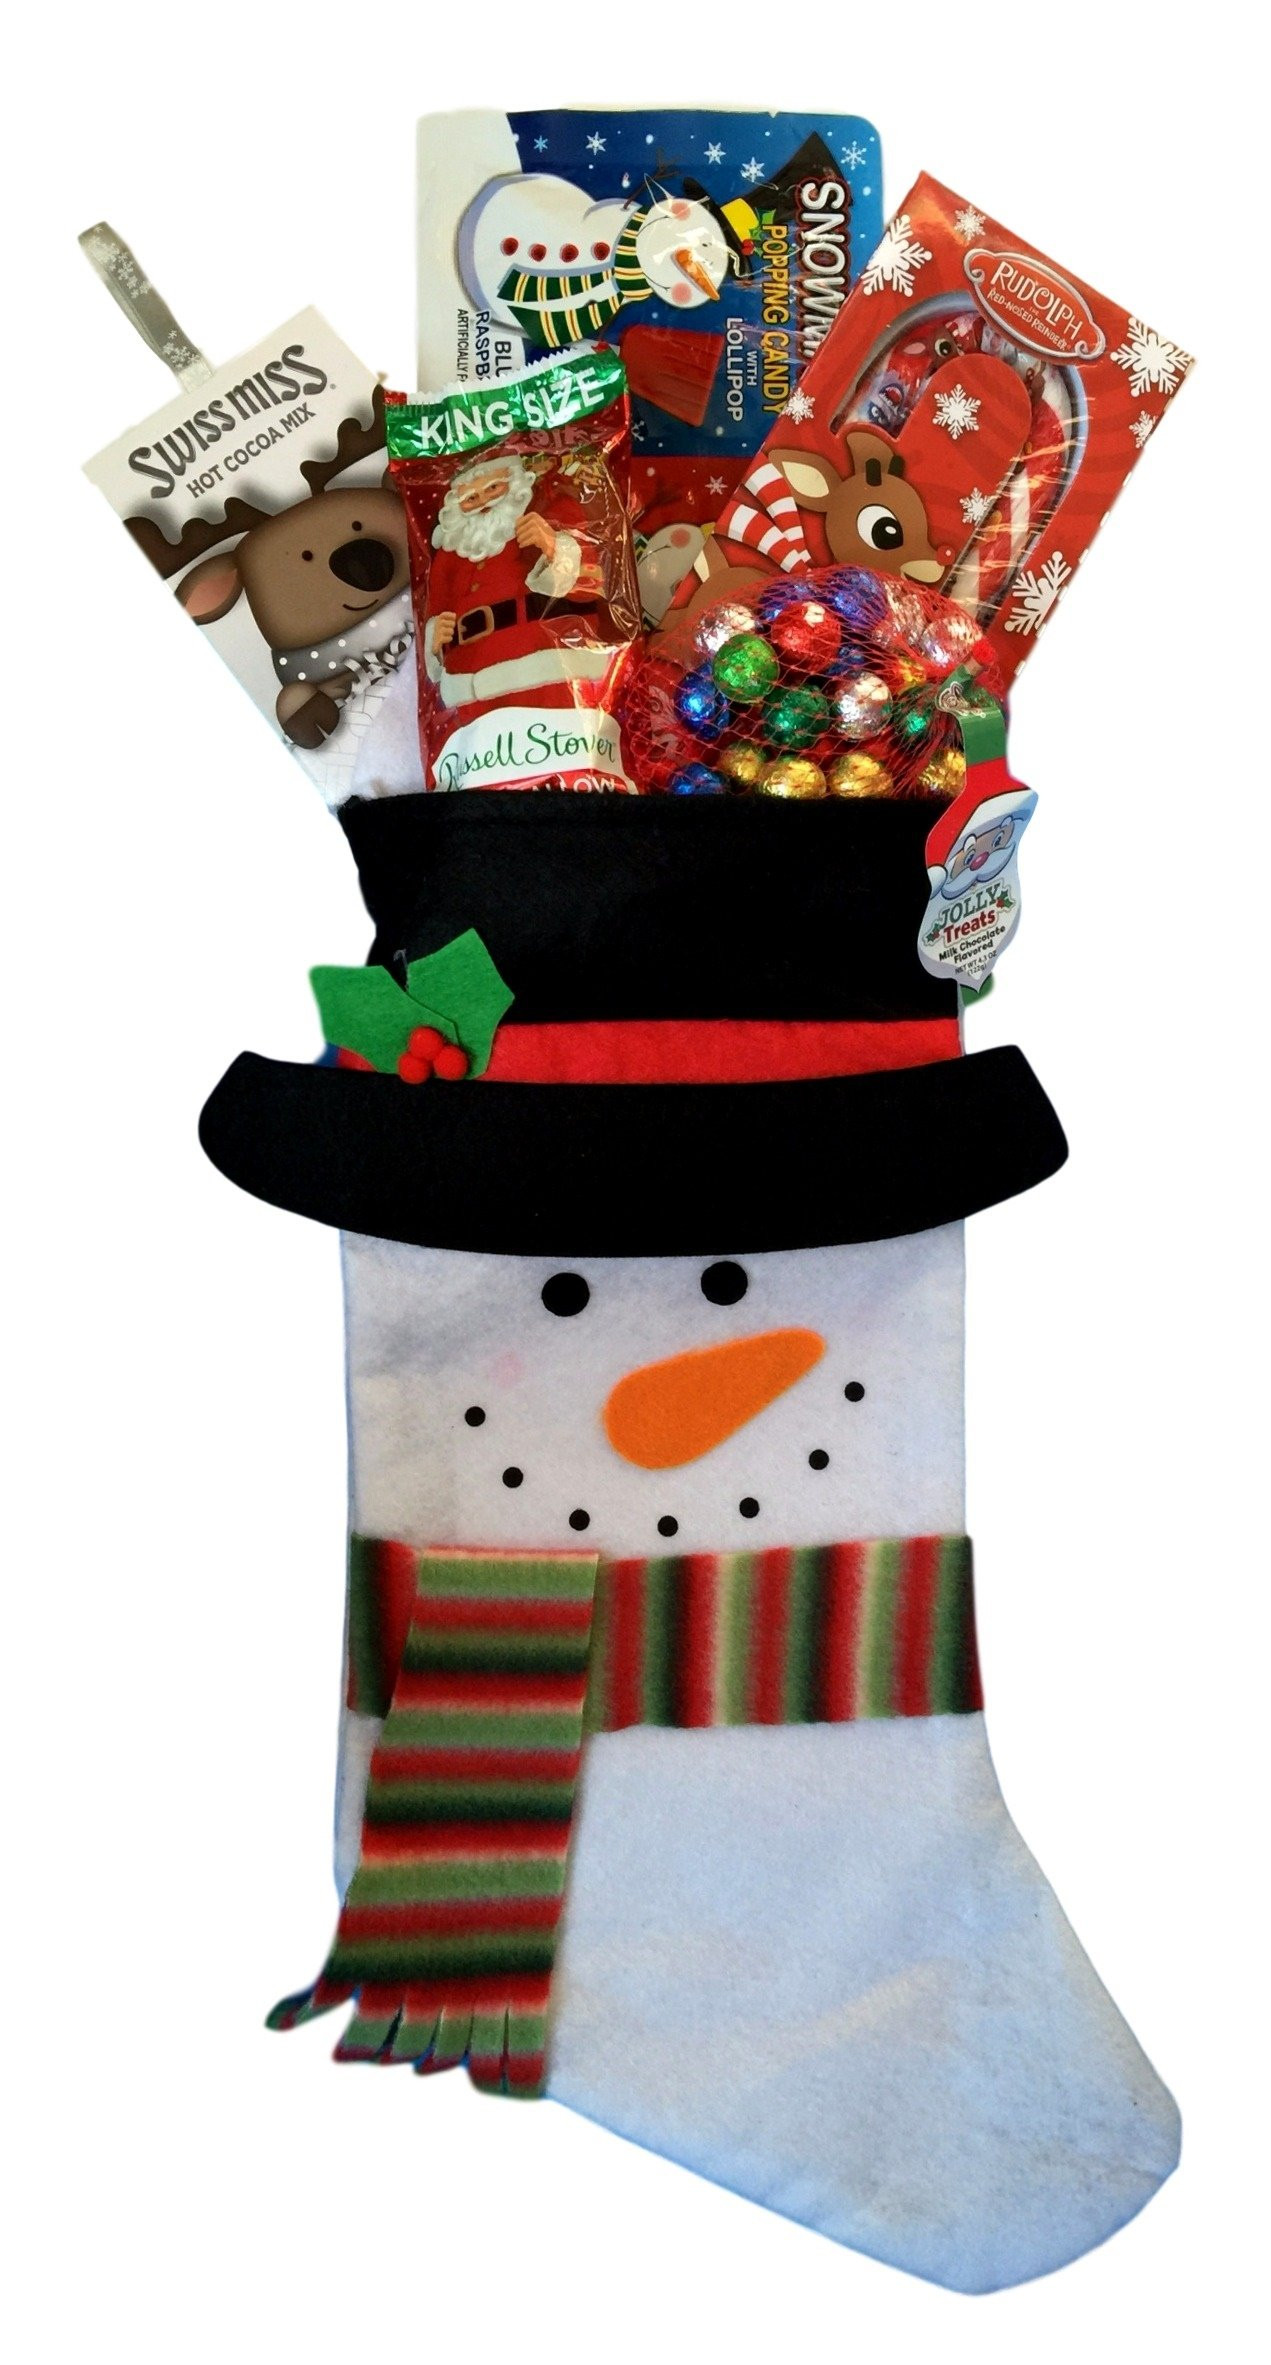 Candy Filled Christmas Stockings
 Holiday Christmas Stocking Gift Filled with Fun Candy